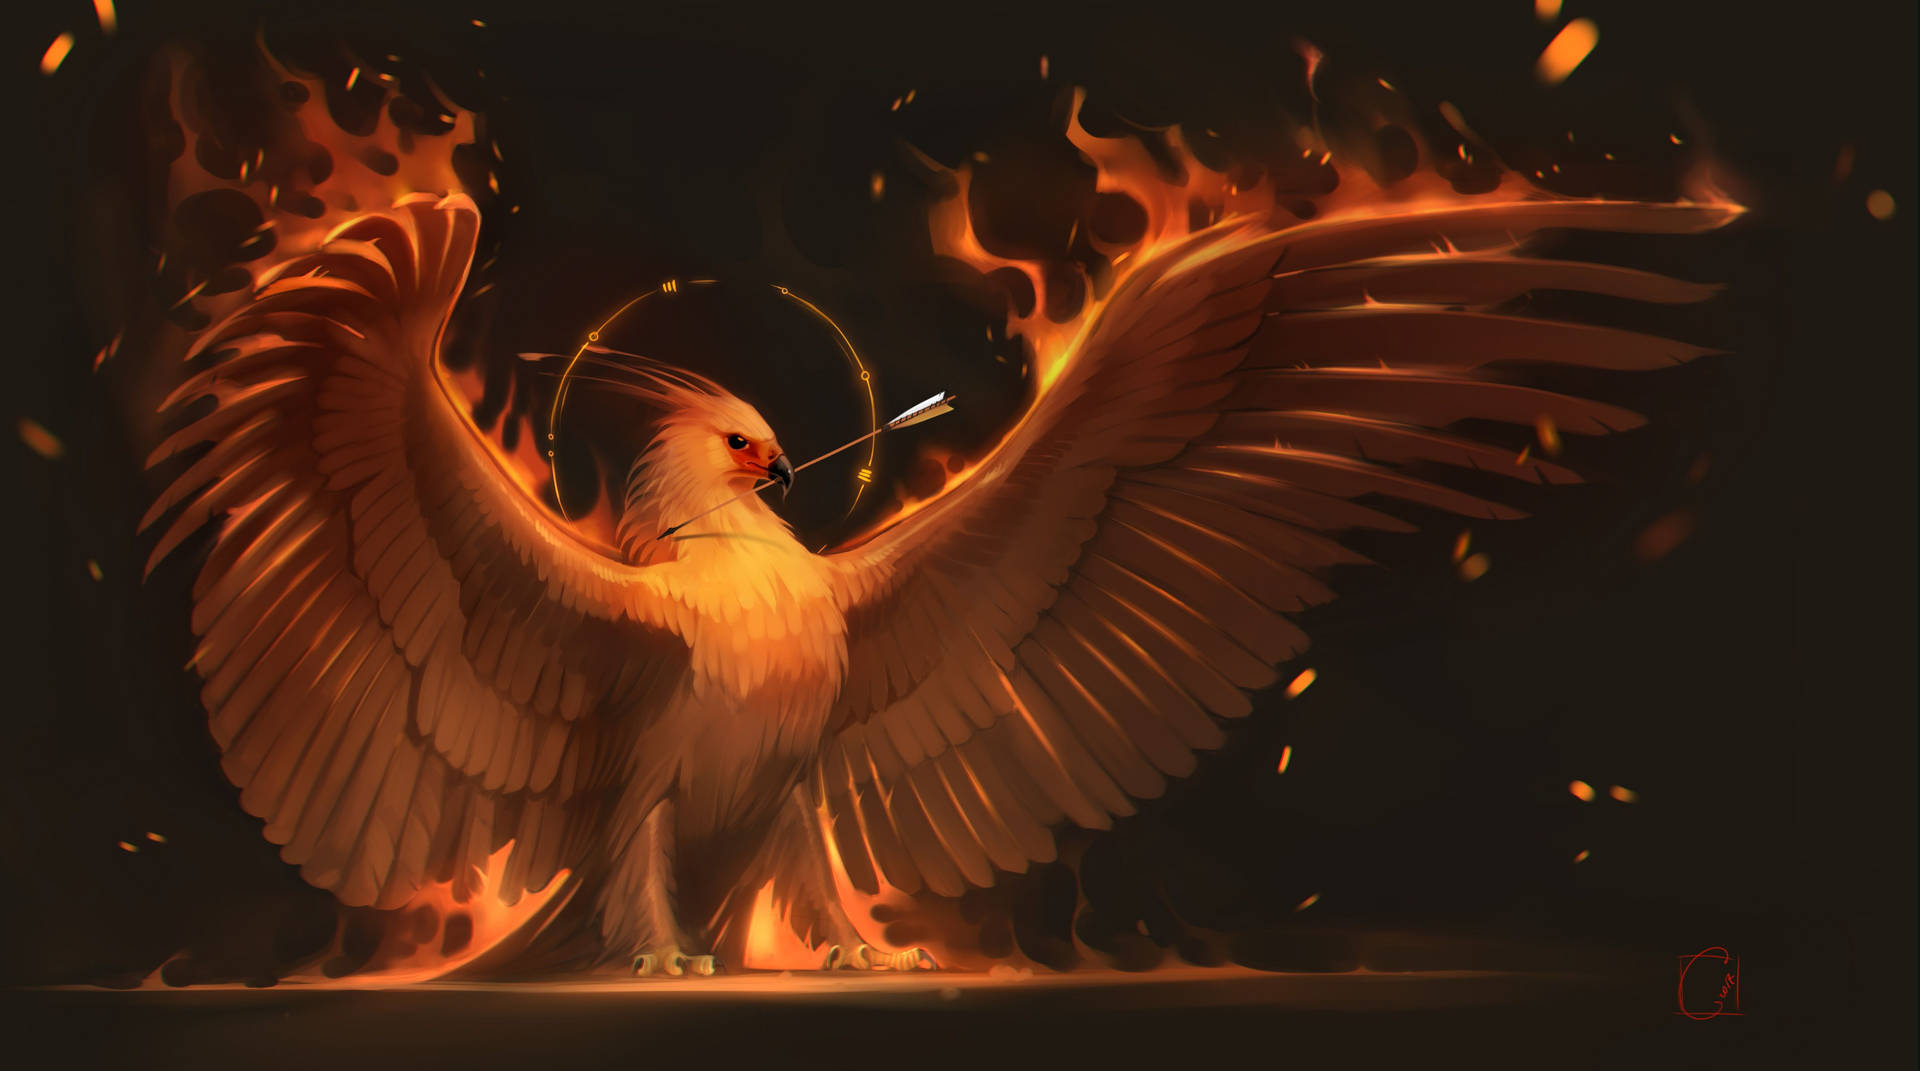 Ancient Symbol of Rebirth - A Fiery Phoenix with an Arrow Wallpaper